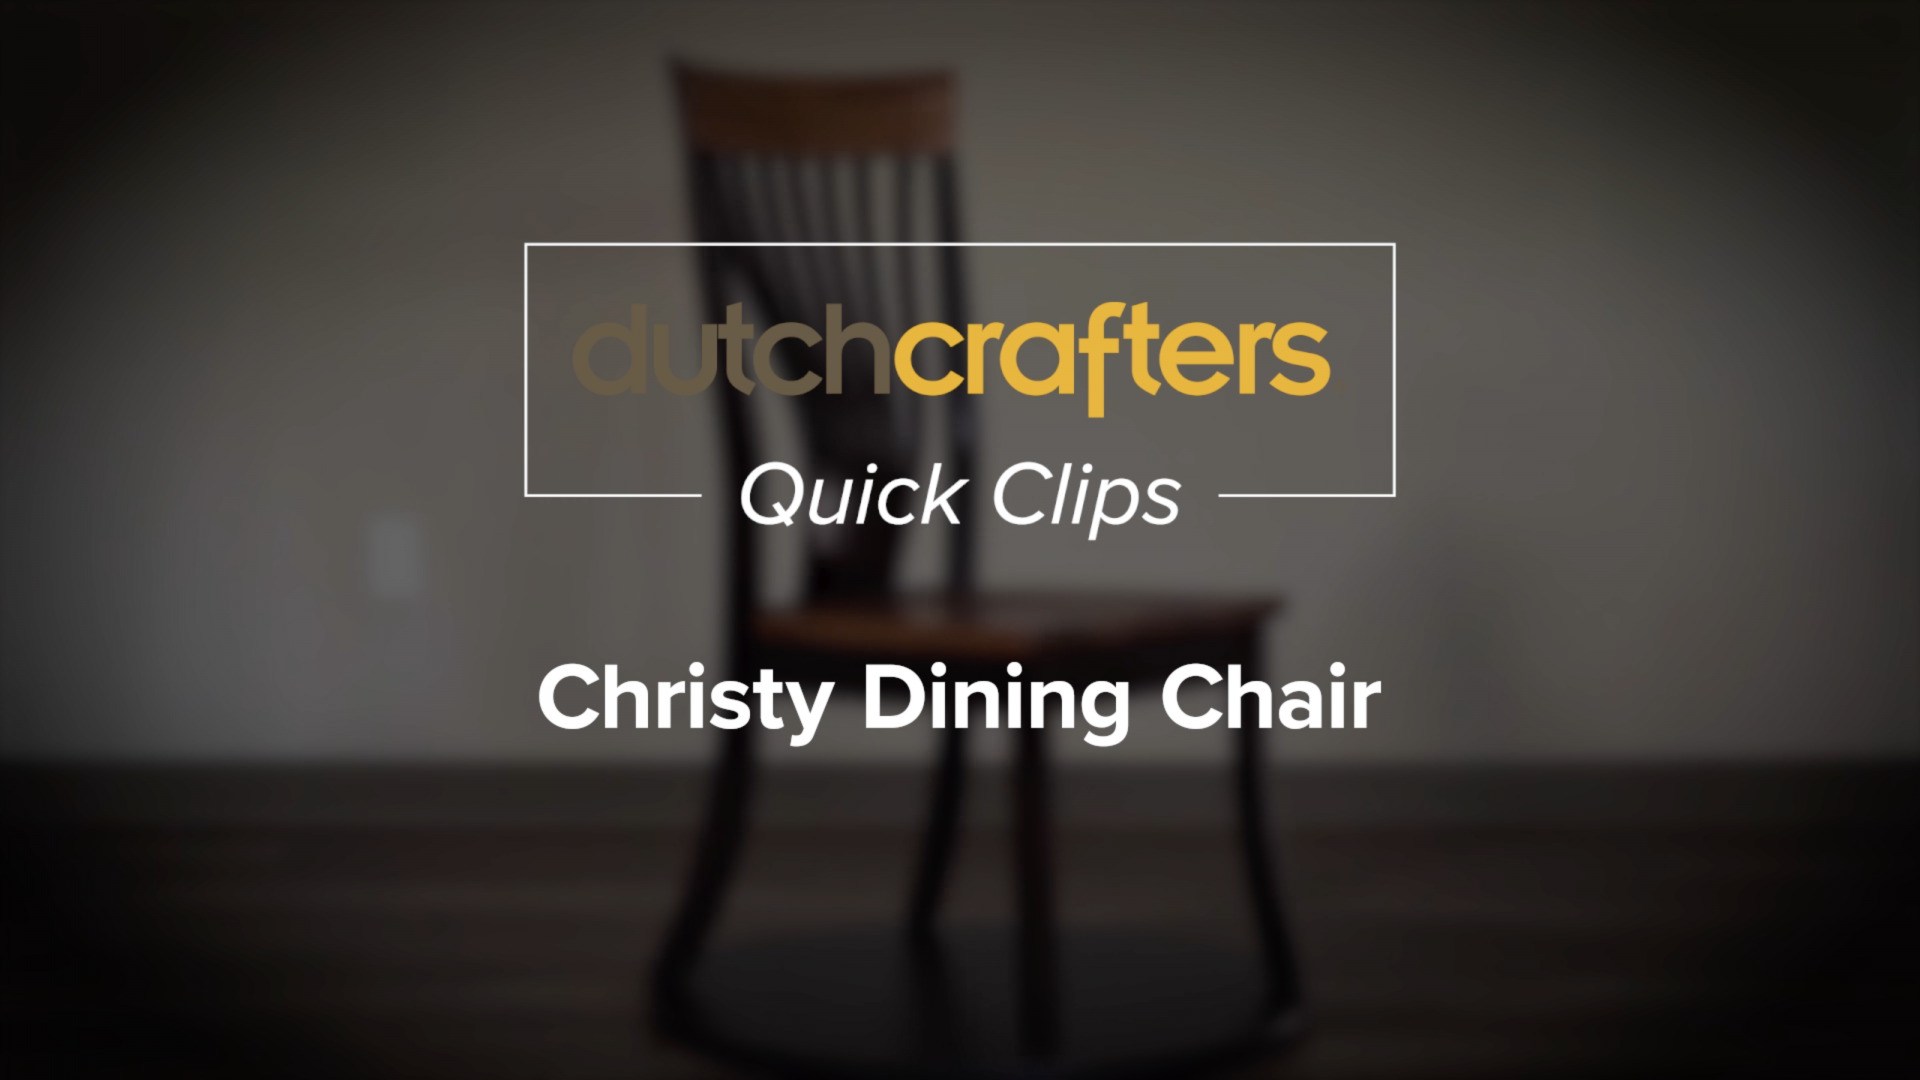 Amish Fanback Christy Dining Chair Video Title Image